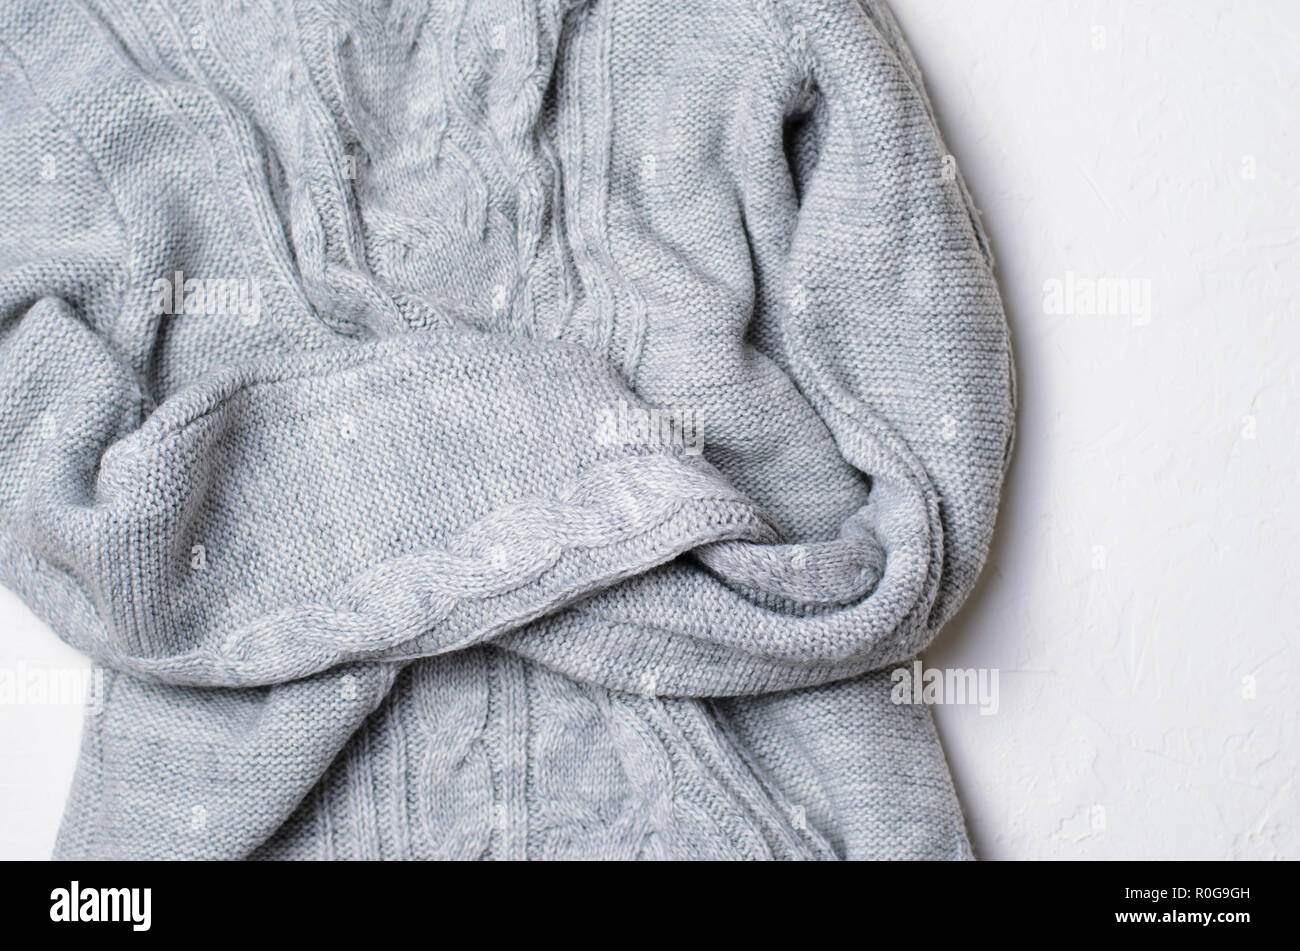 Grey Sweater on White Background, Knitted Winter Clothing, Top View Stock Photo